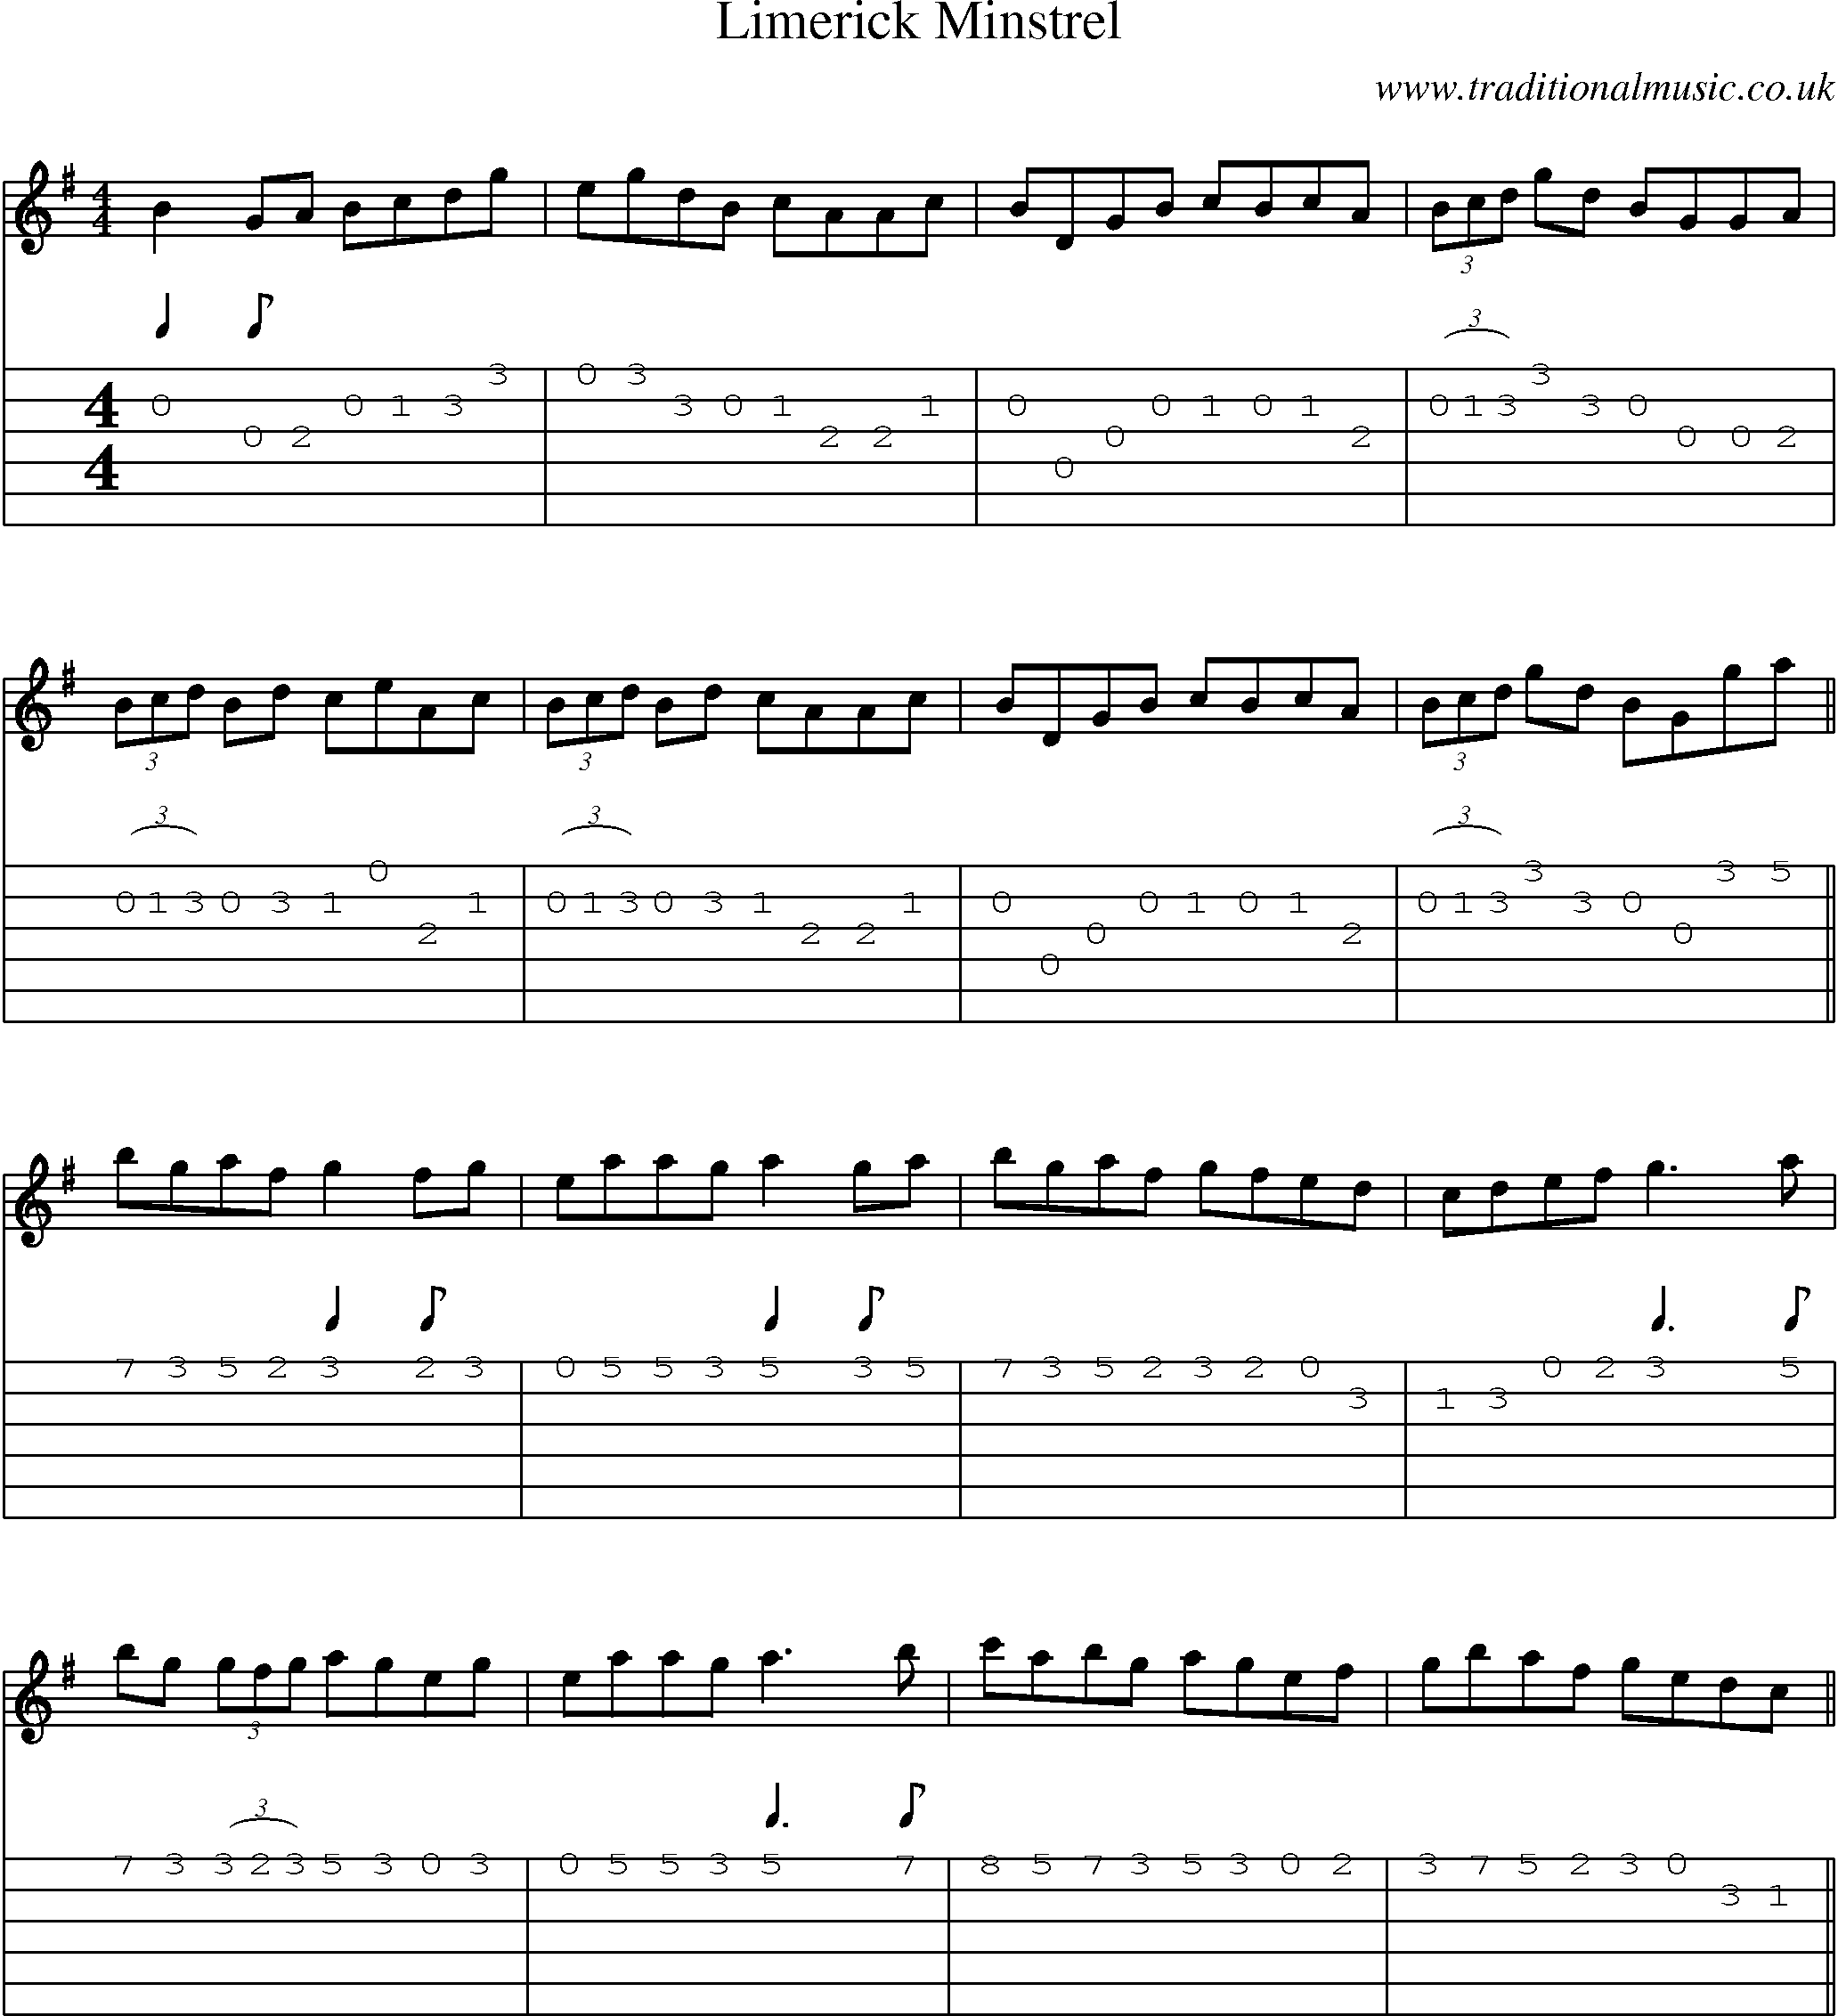 Music Score and Guitar Tabs for Limerick Minstrel